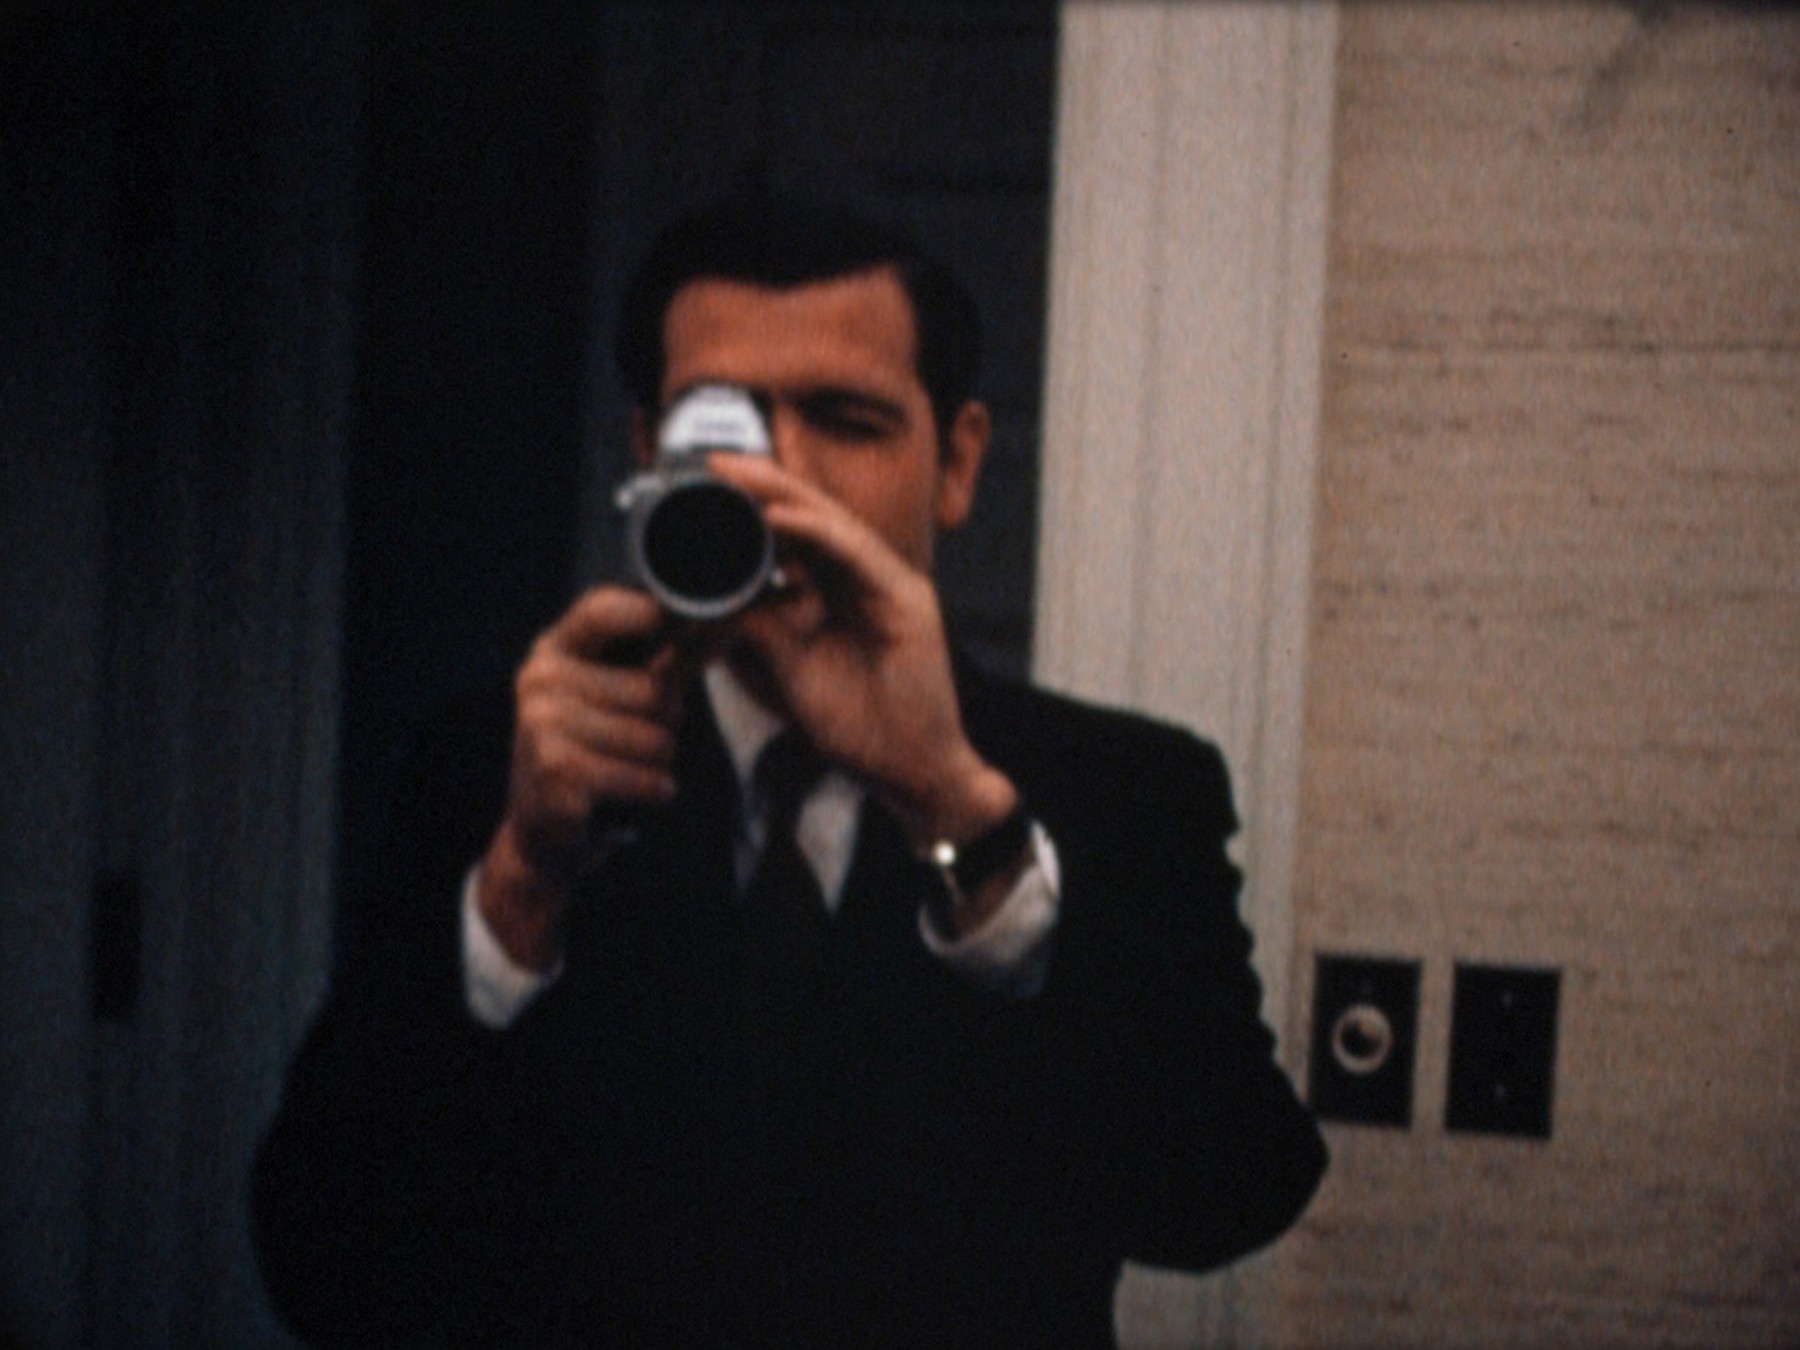 Special Assistant Dwight Chapin films Haldeman filming him at the White House on the night of the Apollo 11 moon landing (July 20, 1969)